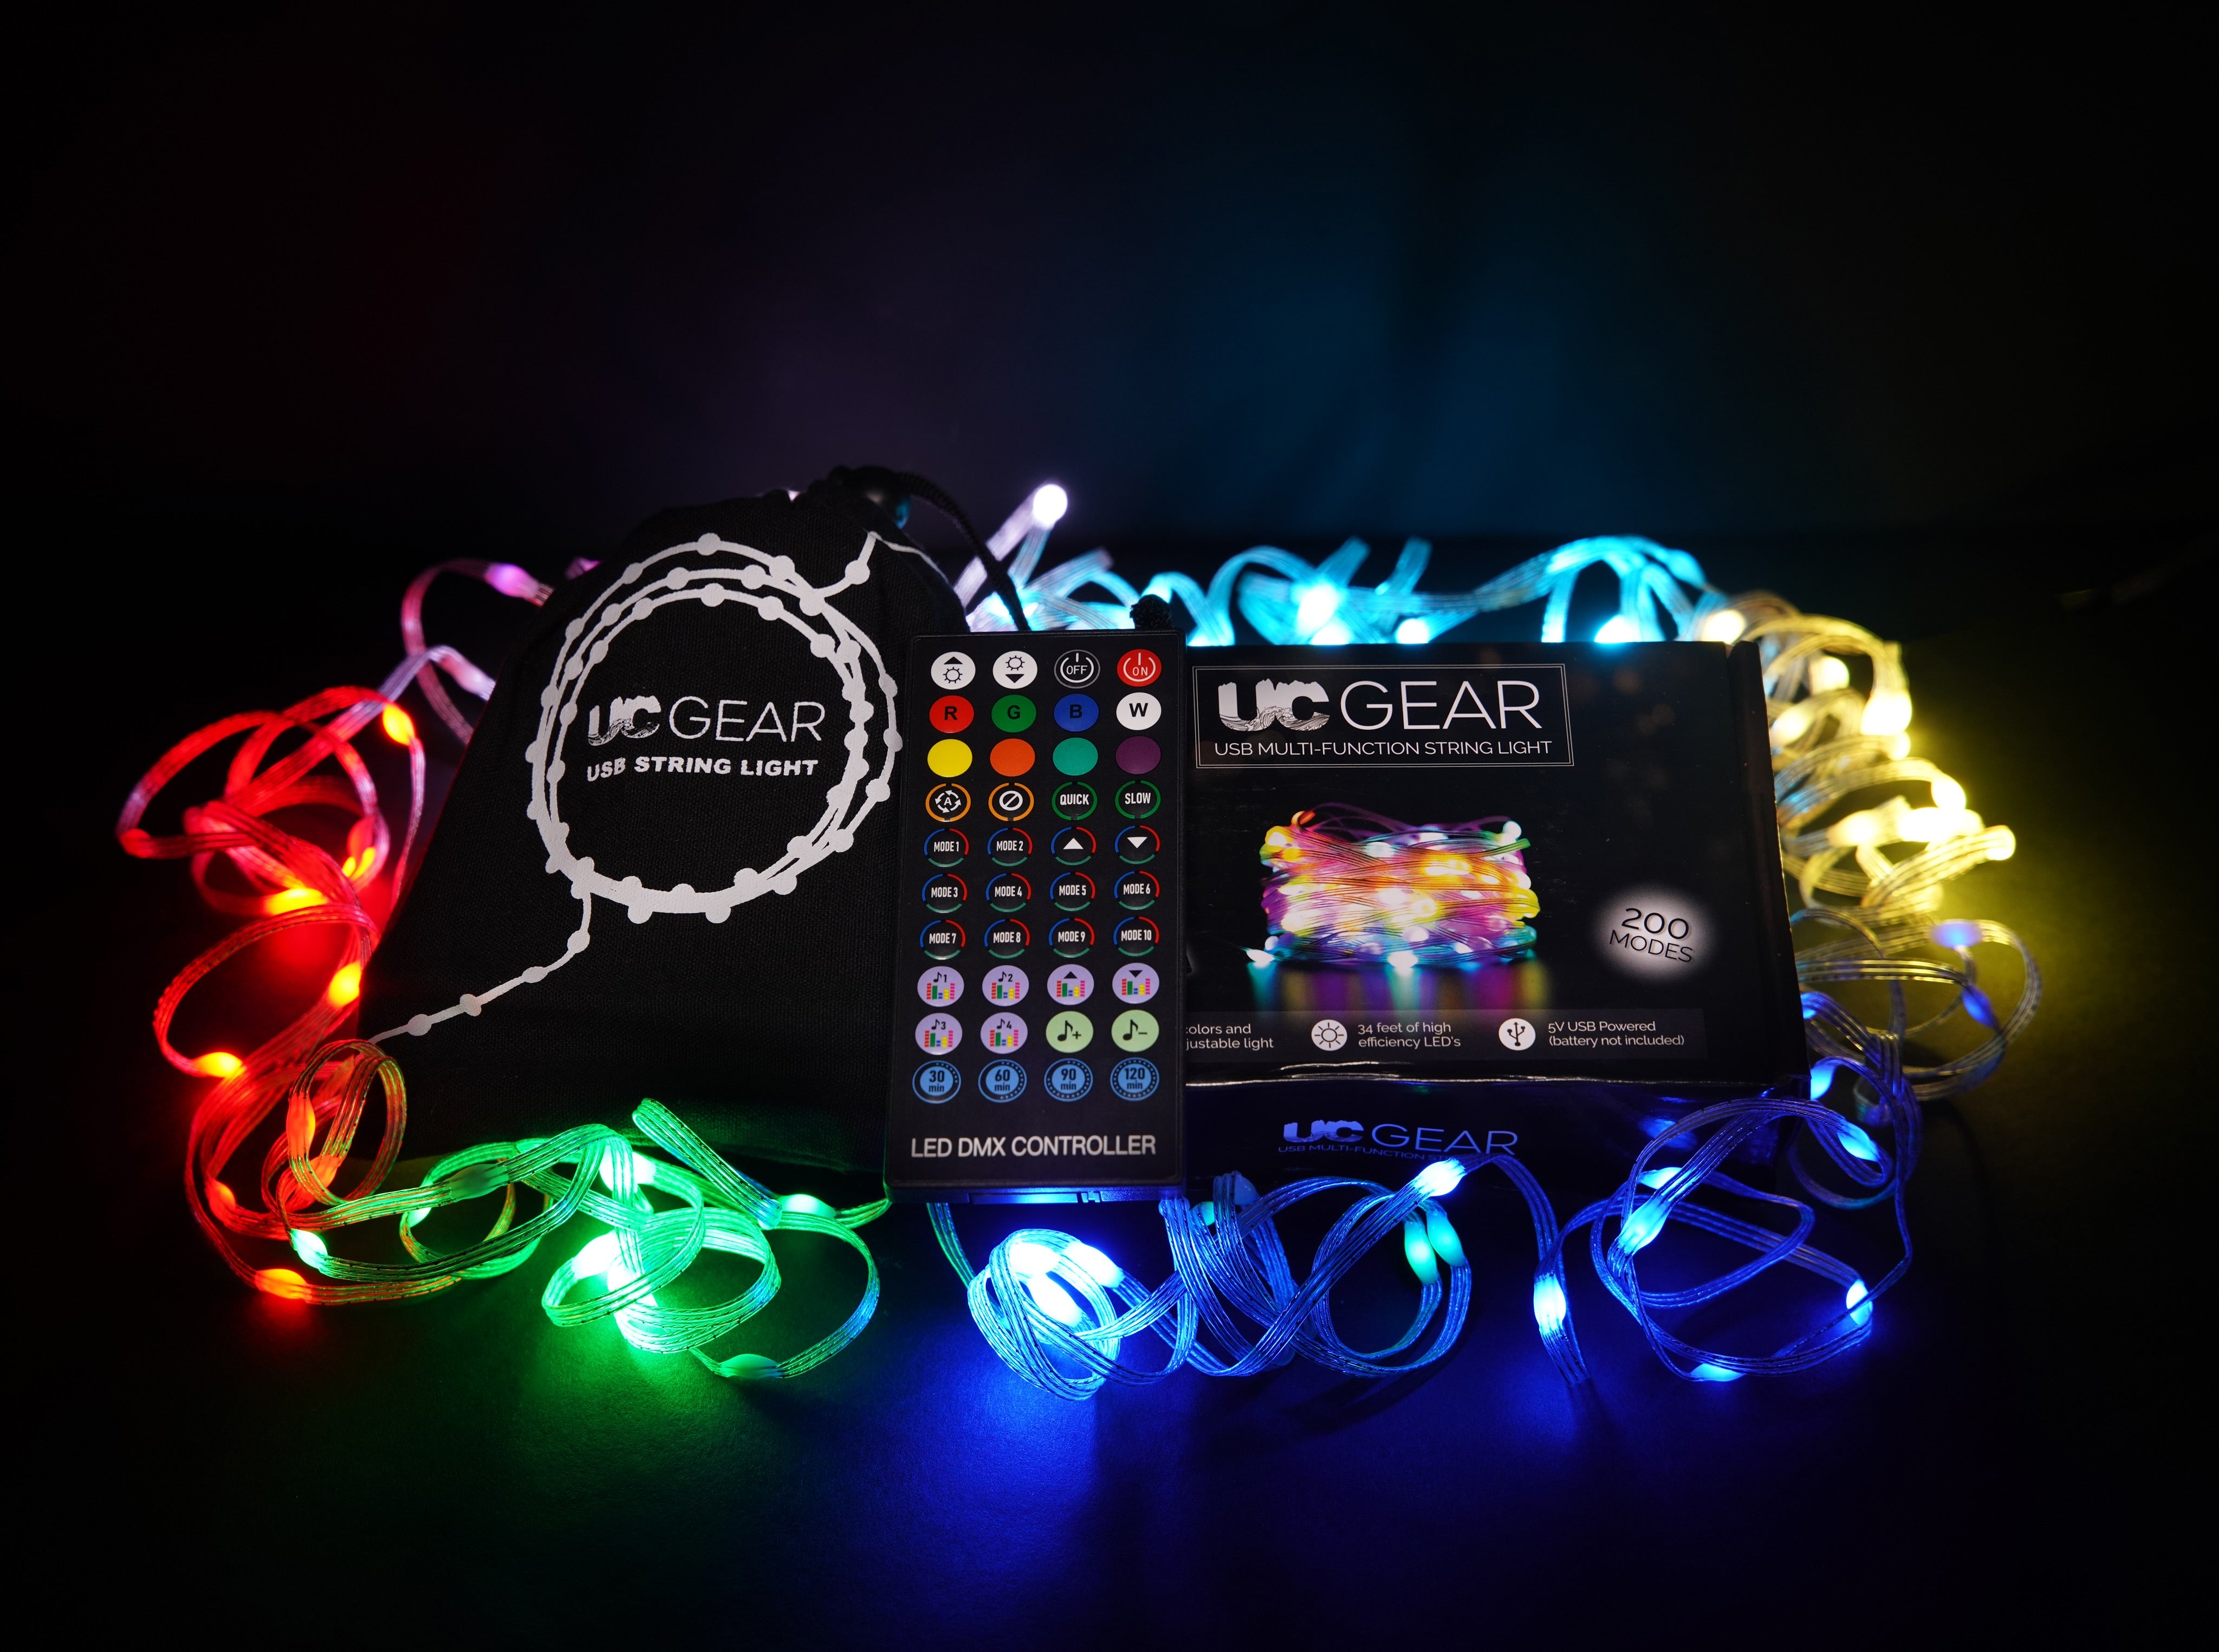 UC Gear USB Multi-Function String Light with Remote